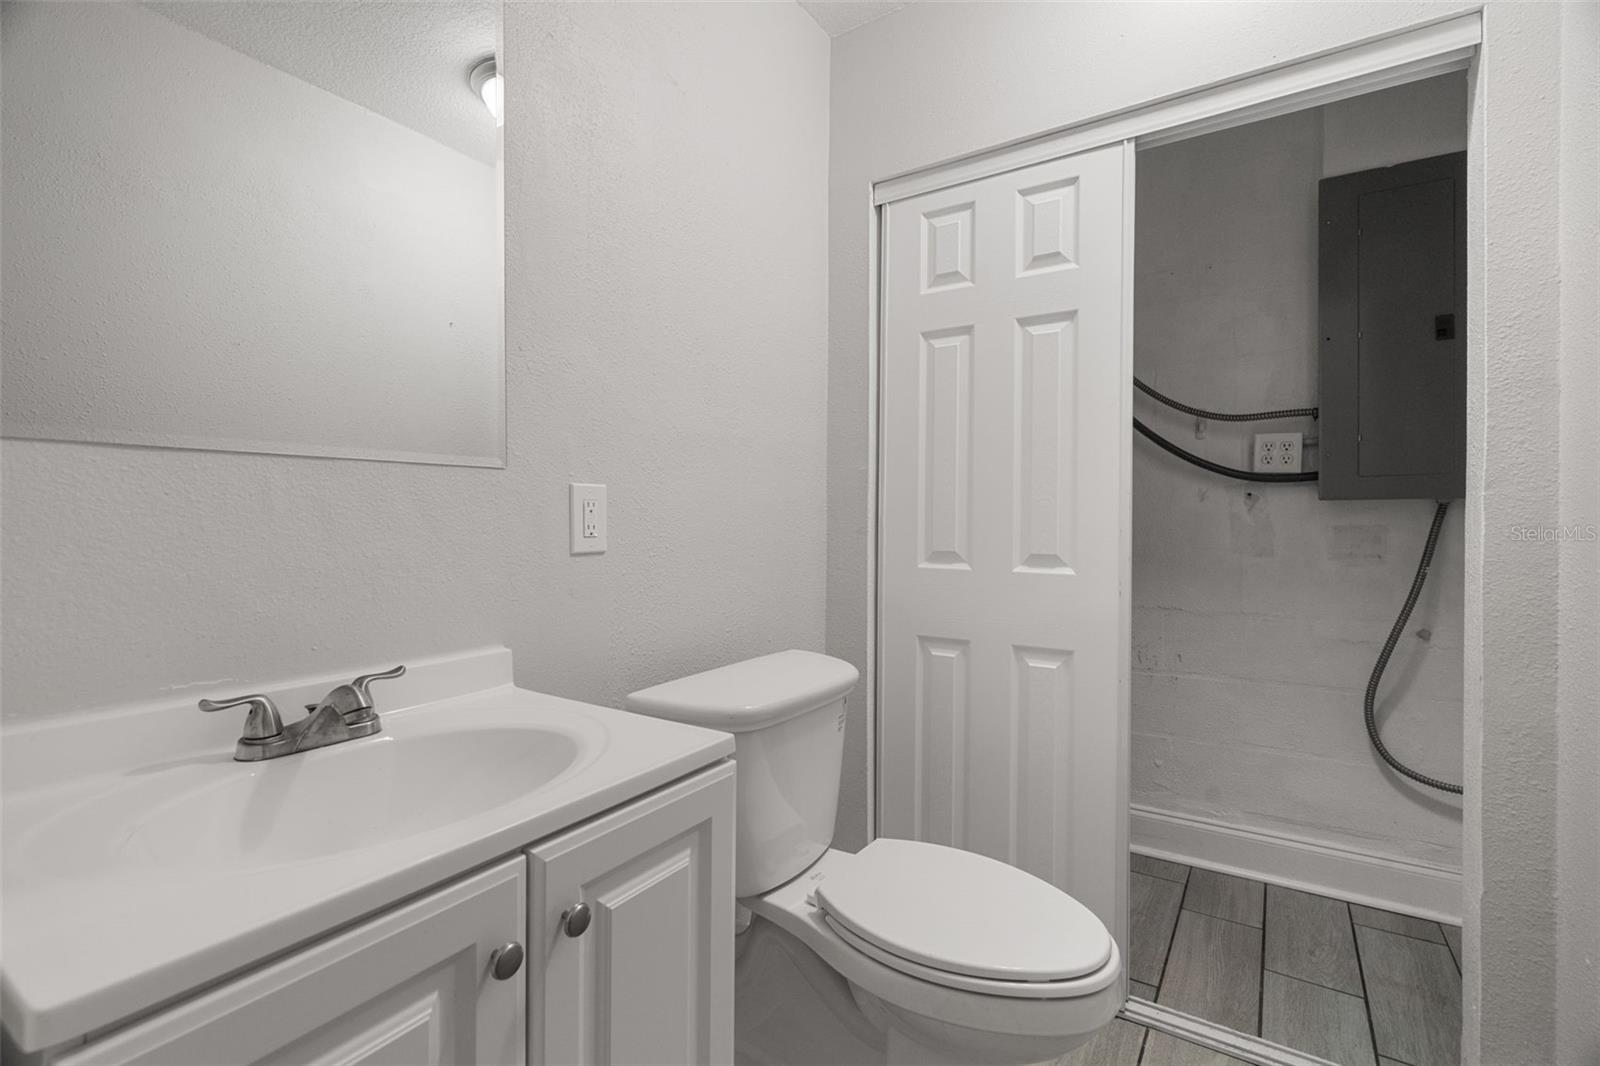 Half bath with laundry as you walk in from the 2 car garage